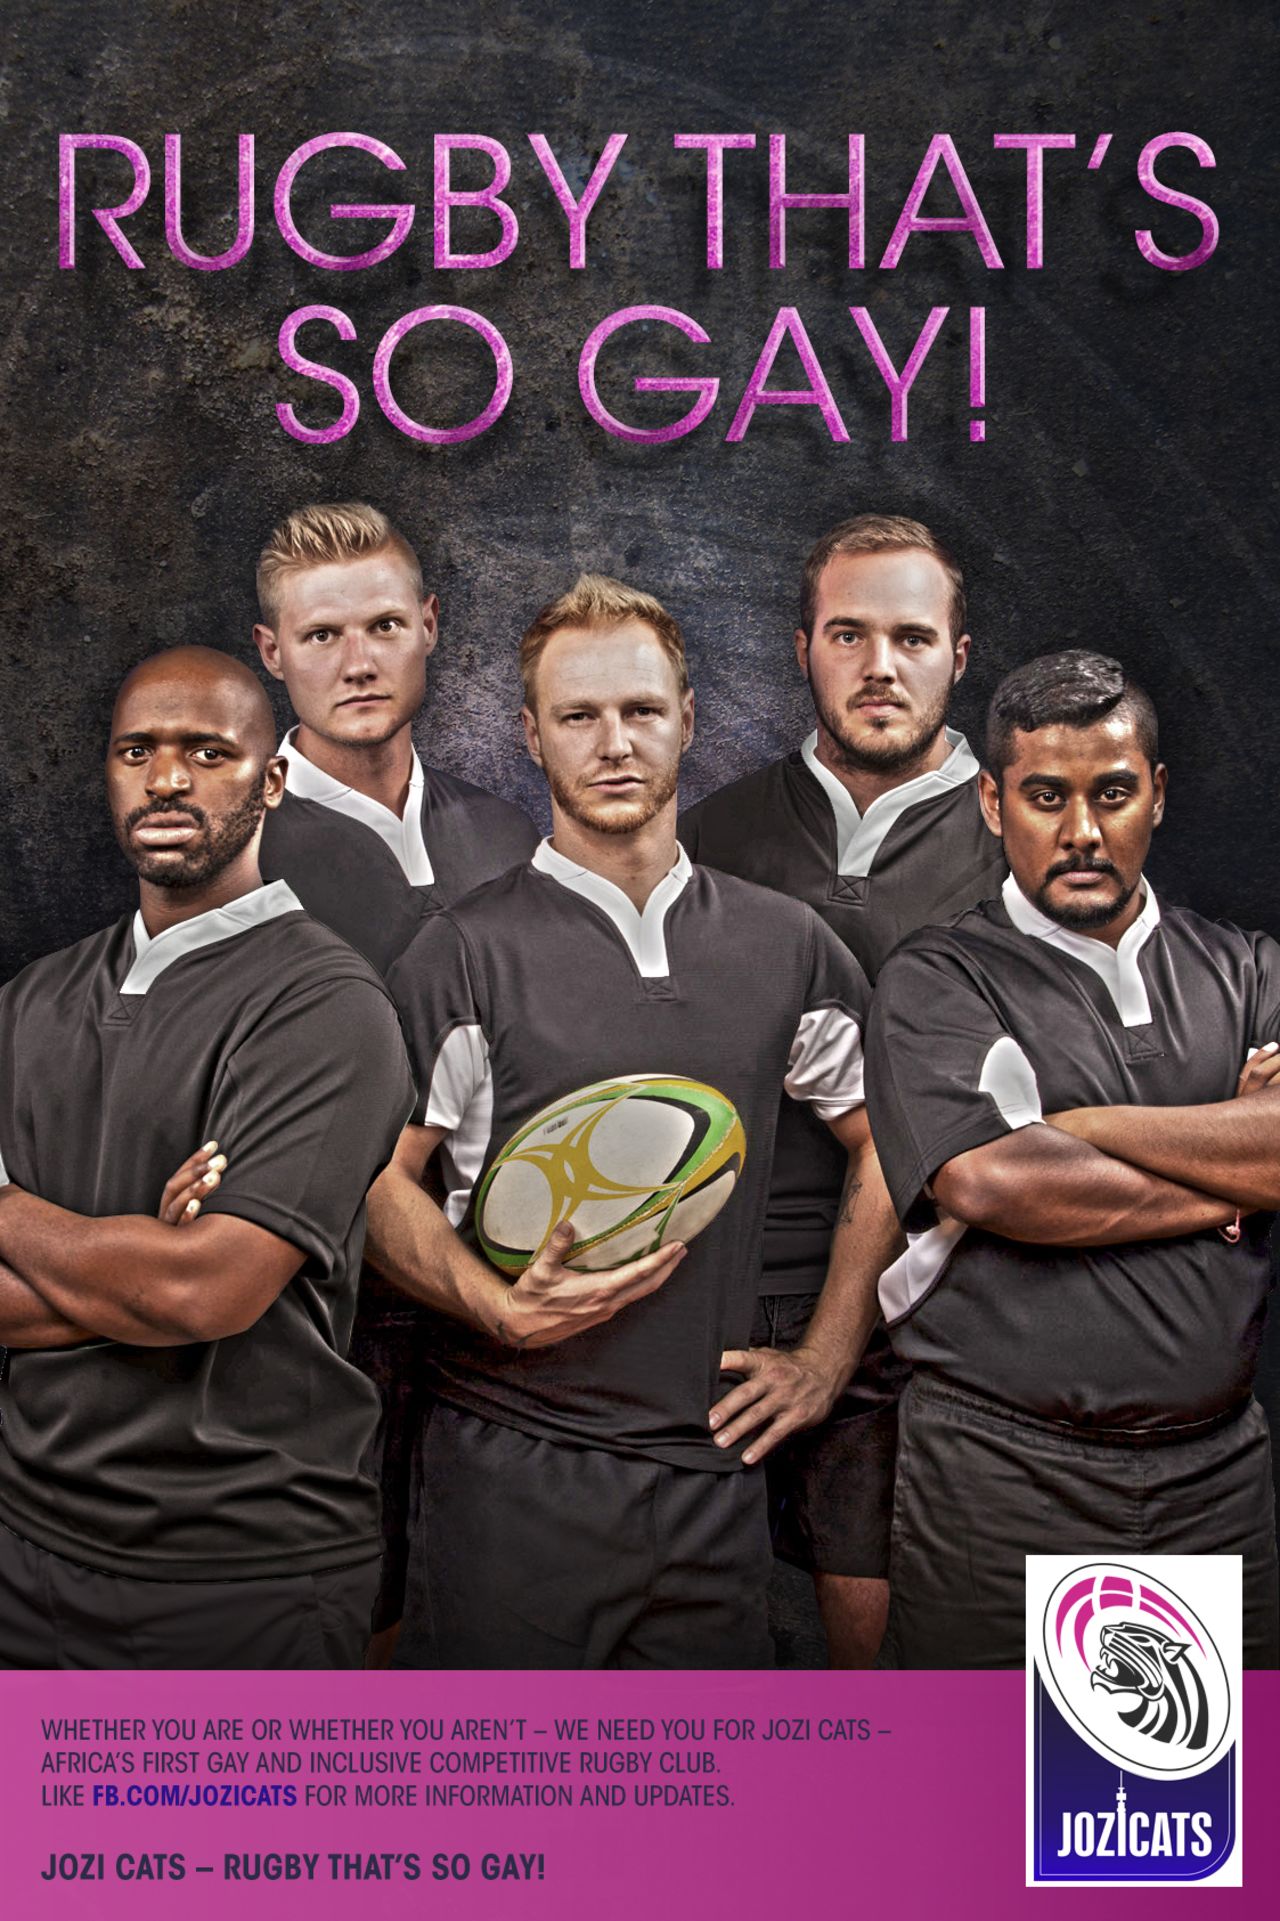 South Africa's Jozi Cats, the first gay rugby team in Africa, is using a provocative advertising campaign to recruit members to its club.